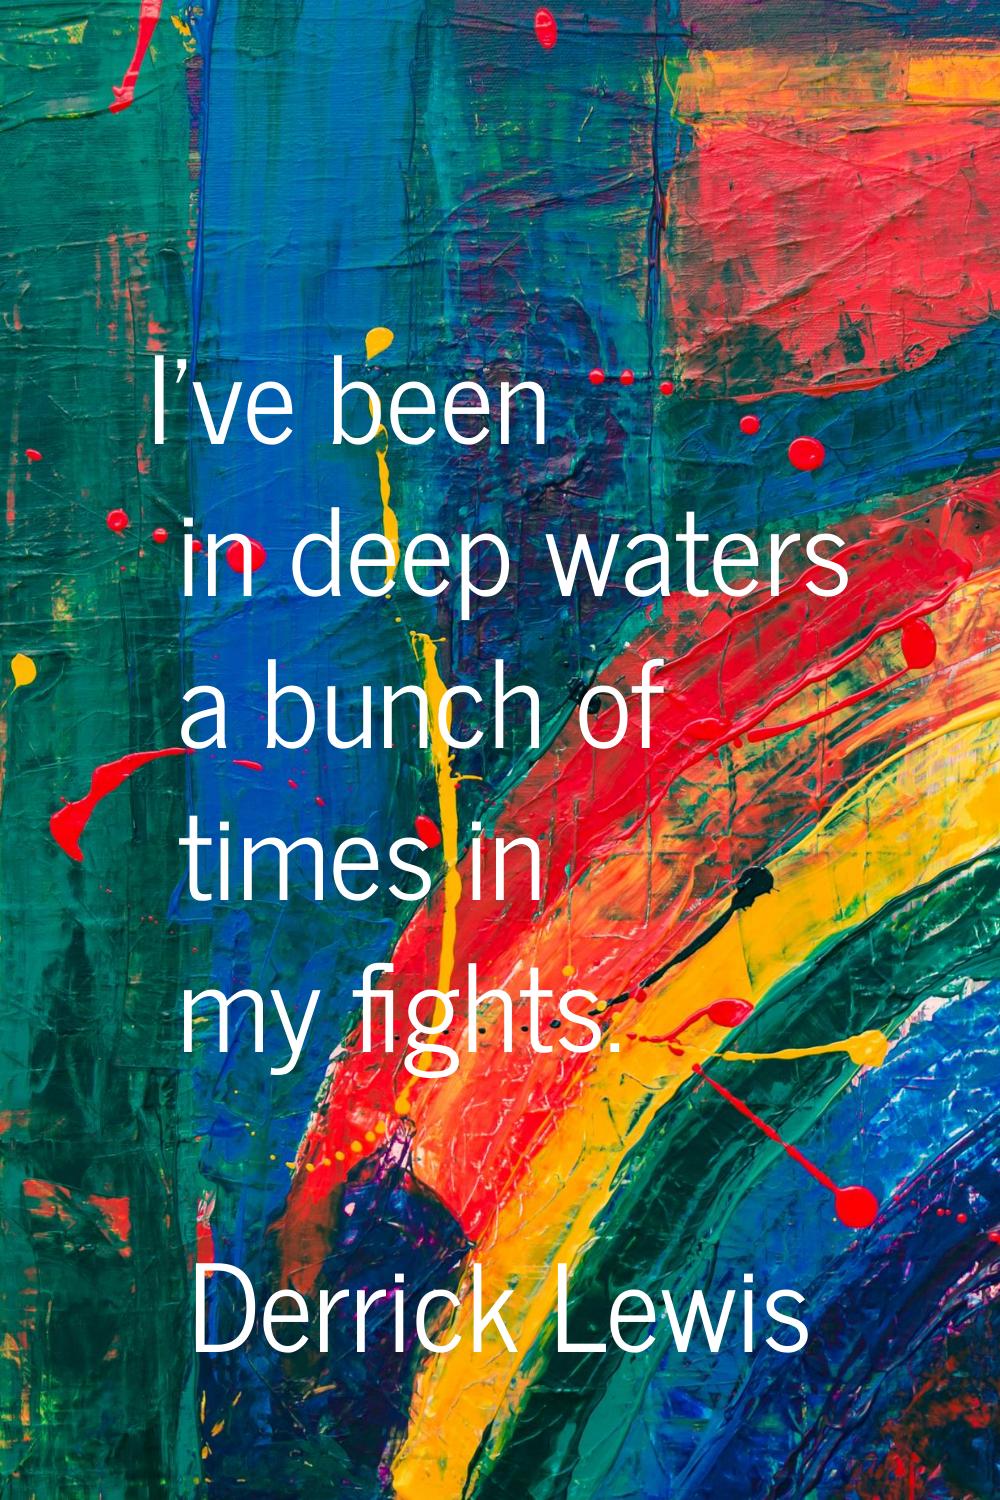 I've been in deep waters a bunch of times in my fights.